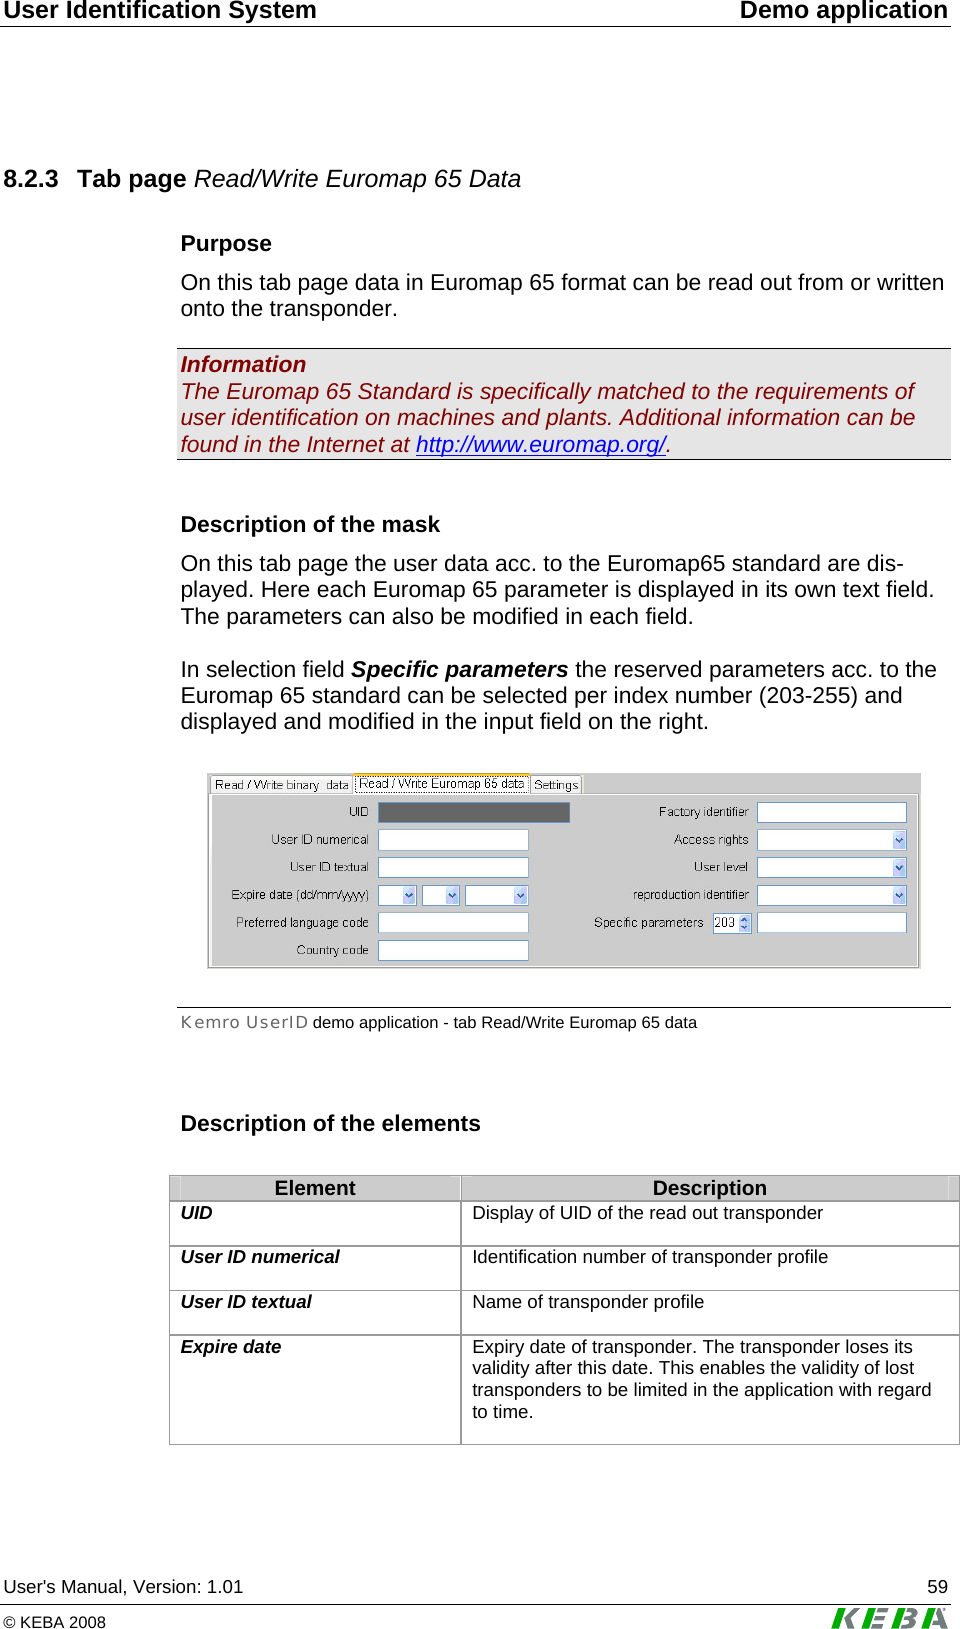 User Identification System  Demo application User&apos;s Manual, Version: 1.01  59 © KEBA 2008   8.2.3 Tab page Read/Write Euromap 65 Data Purpose On this tab page data in Euromap 65 format can be read out from or written onto the transponder.  Information The Euromap 65 Standard is specifically matched to the requirements of user identification on machines and plants. Additional information can be found in the Internet at 0Hhttp://www.euromap.org/H.  Description of the mask On this tab page the user data acc. to the Euromap65 standard are dis-played. Here each Euromap 65 parameter is displayed in its own text field. The parameters can also be modified in each field.   In selection field Specific parameters the reserved parameters acc. to the Euromap 65 standard can be selected per index number (203-255) and displayed and modified in the input field on the right.   Kemro UserID demo application - tab Read/Write Euromap 65 data  Description of the elements  Element  Description UID  Display of UID of the read out transponder  User ID numerical  Identification number of transponder profile  User ID textual  Name of transponder profile  Expire date  Expiry date of transponder. The transponder loses its validity after this date. This enables the validity of lost transponders to be limited in the application with regard to time.  